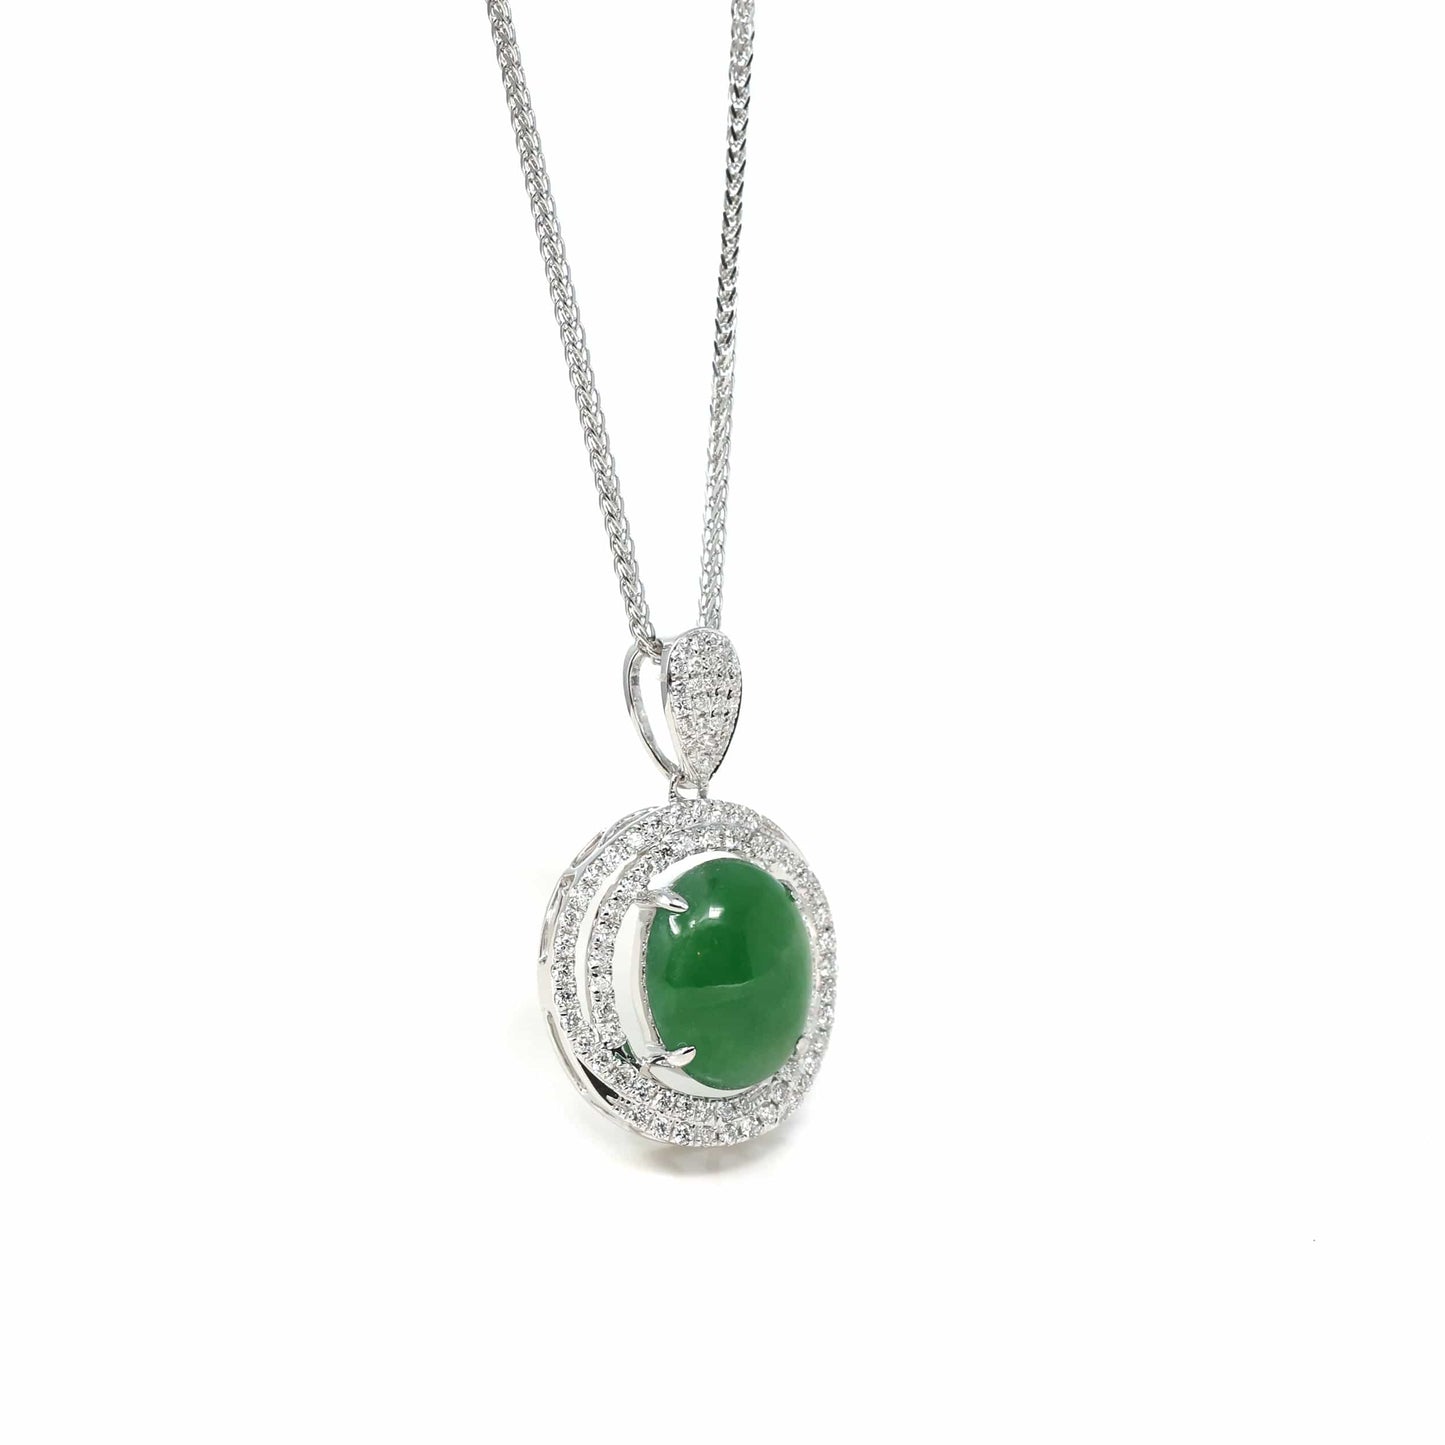 RealJade Co. 18k Gold Jadeite Necklace 18K White Gold Oval Imperial Jadeite Jade Cabochon Necklace with Diamonds